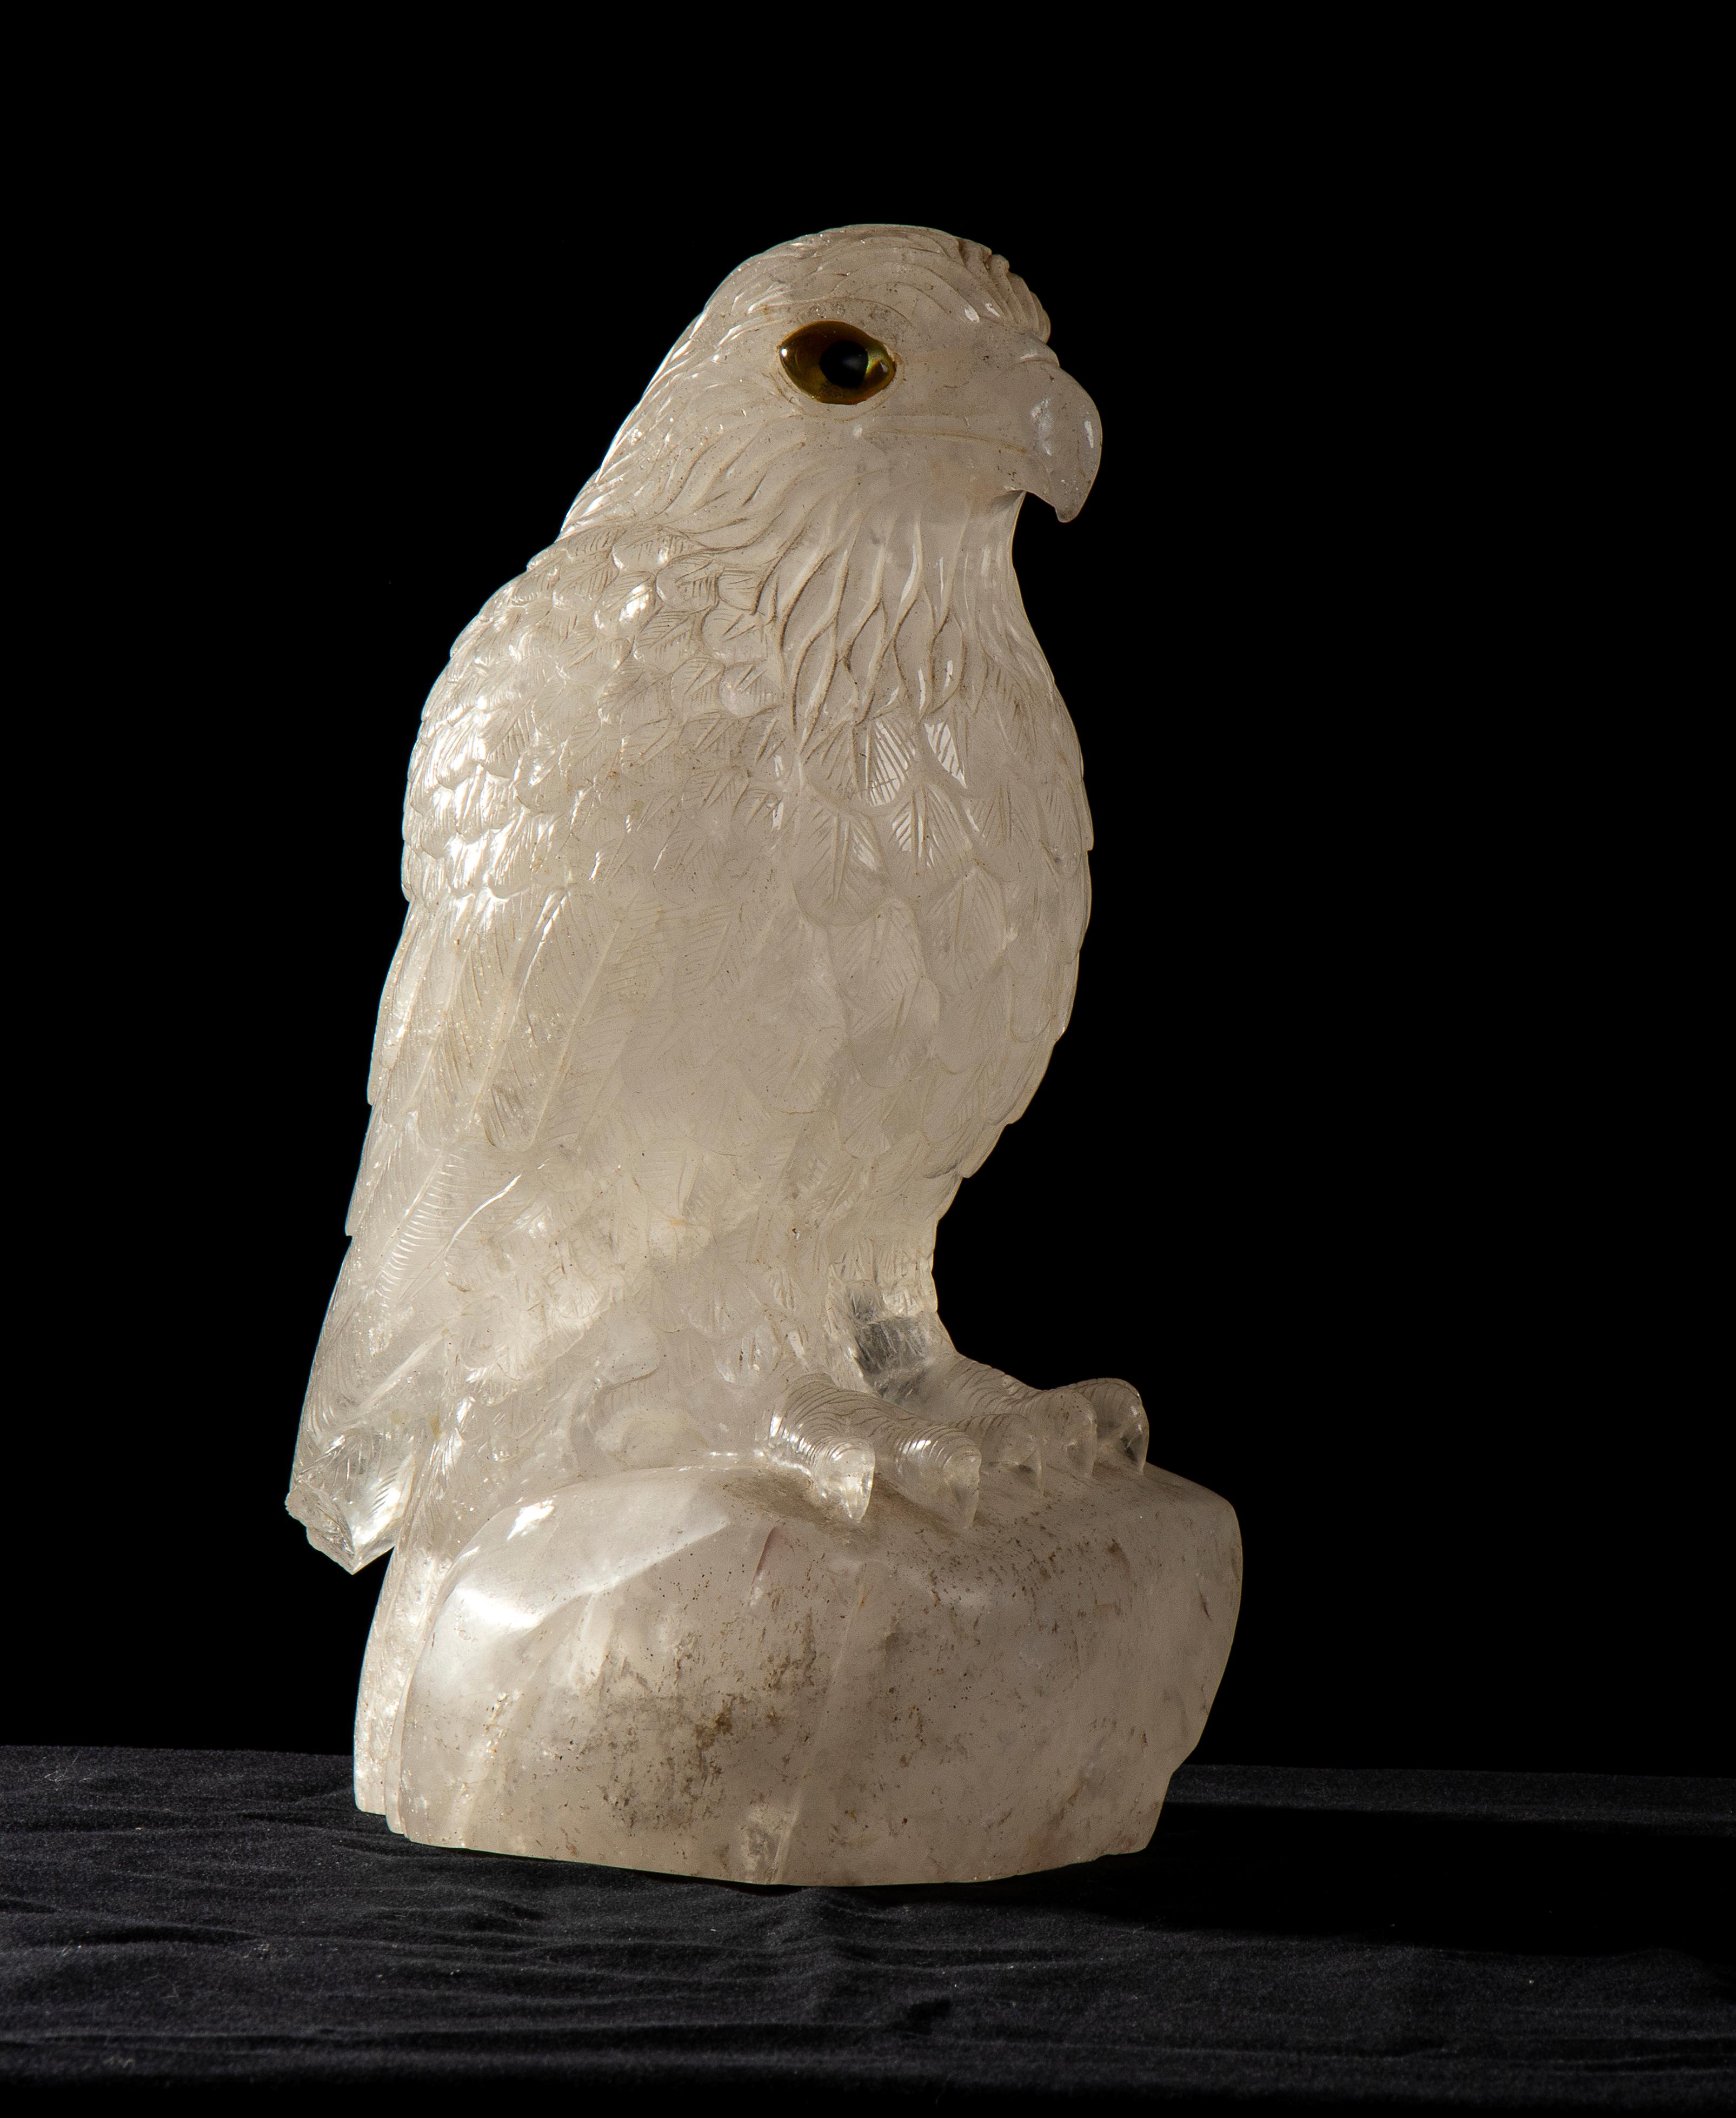 Sculpture of Eagle Carved From A Block Of Rock Crystal White Quartz  - Black Figurative Sculpture by Unknown